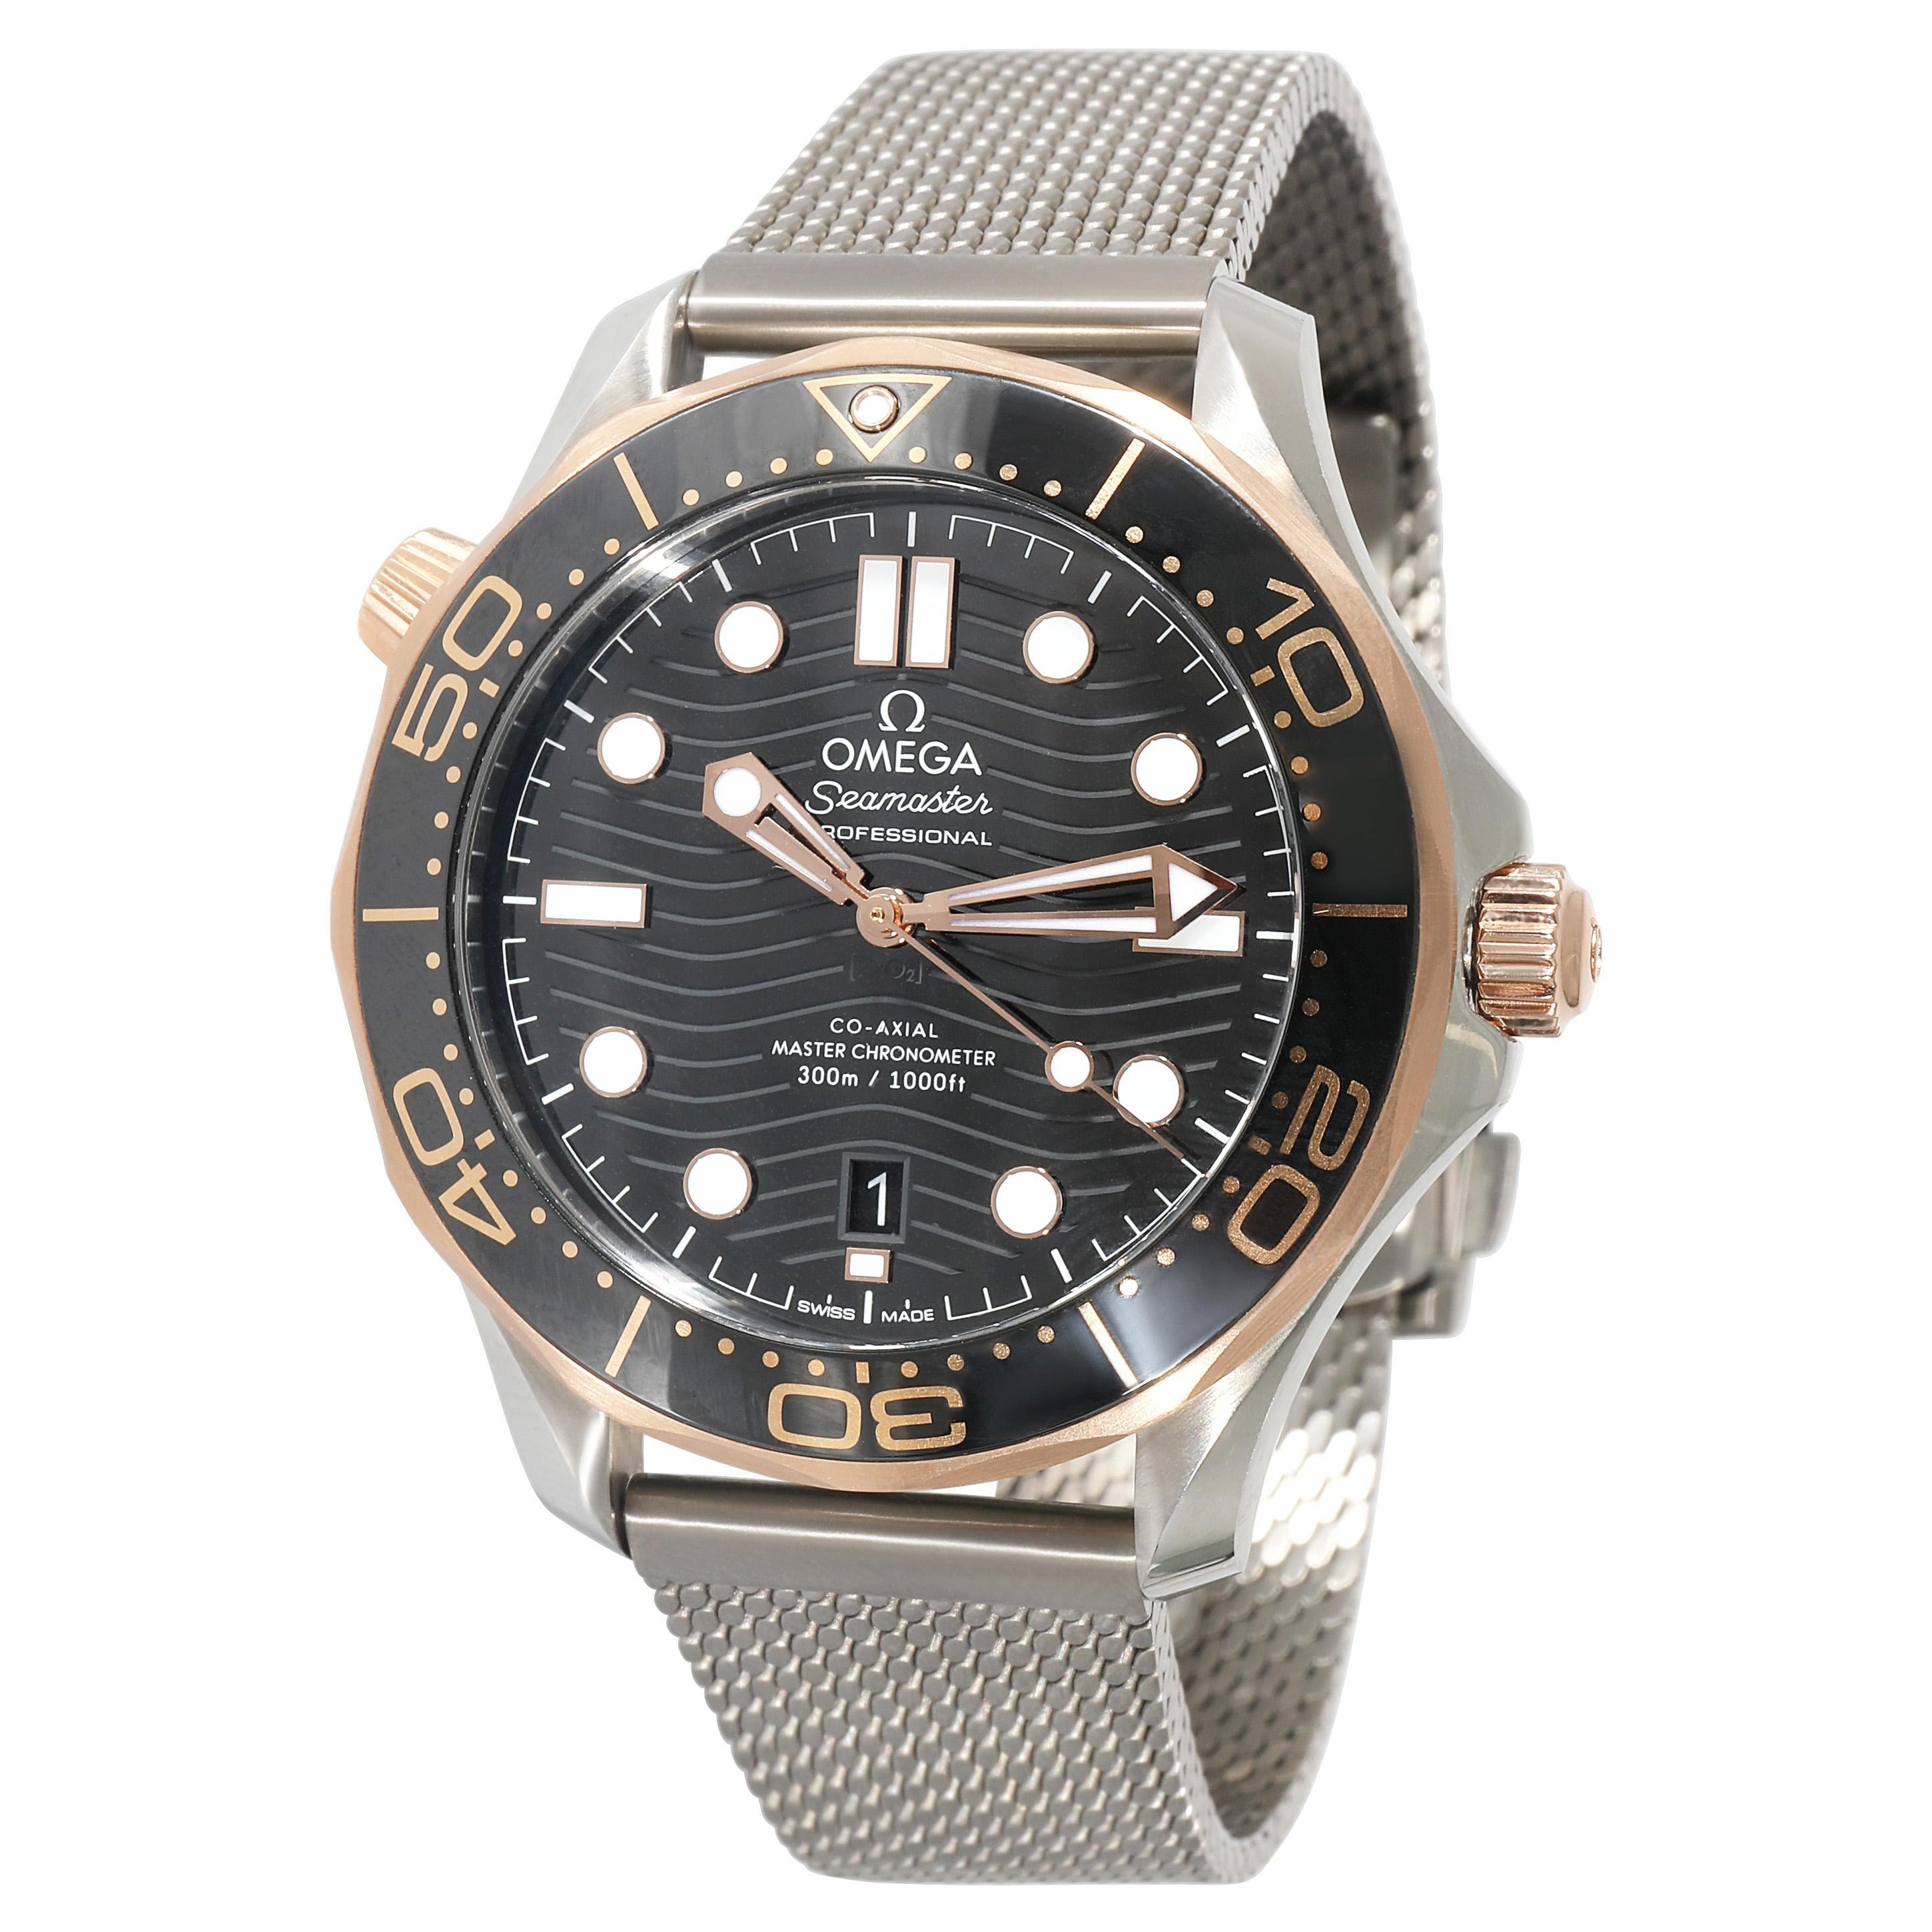 Omega Seamaster Diver 300M 210.22.42.20.01.002 Men's Watch in 18kt Stainless Ste